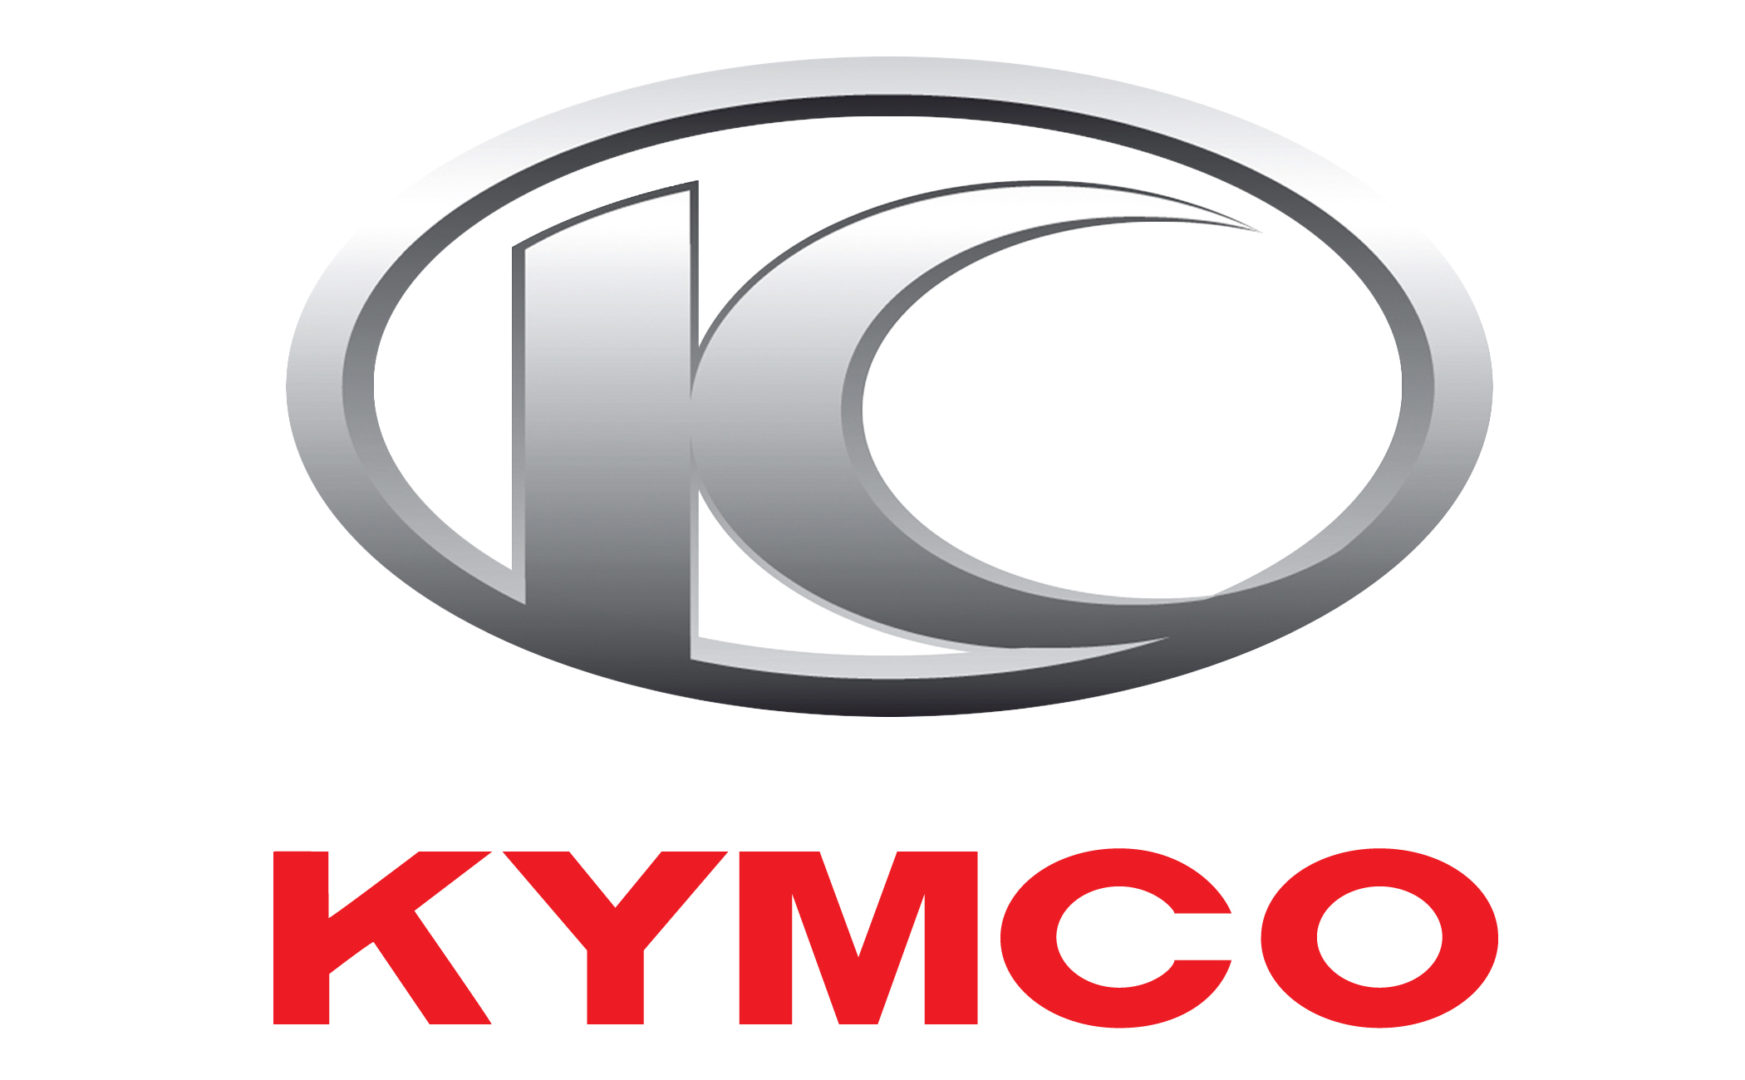 Kymco motorcycle logo history and Meaning, bike emblem